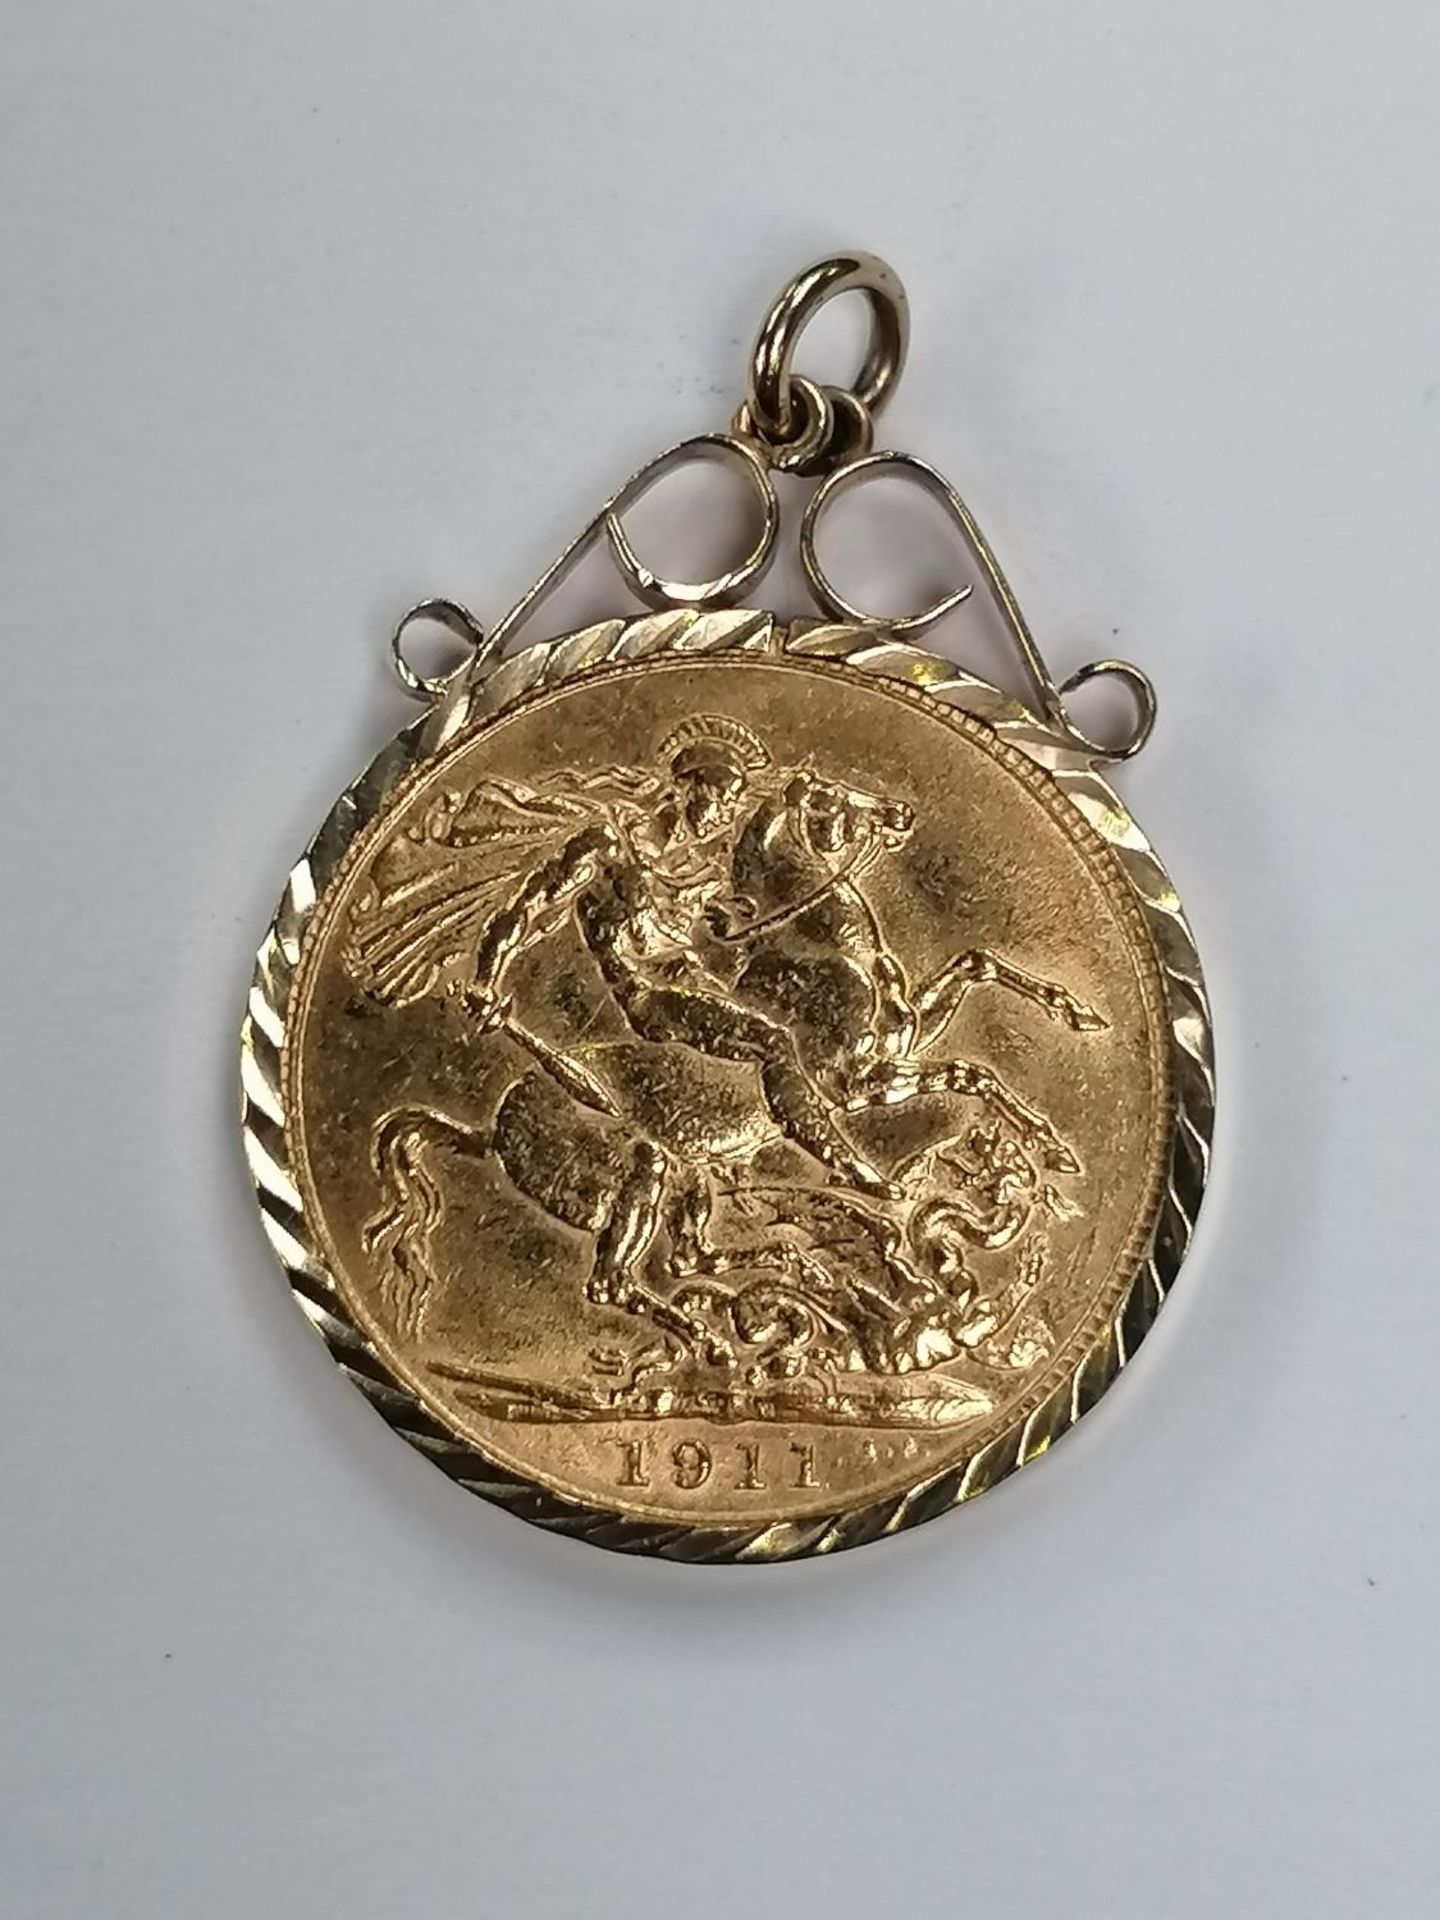 A 1911 GOLD FULL SOVEREIGN IN 9CT GOLD MOUNT, GROSS WEIGHT 9.2 G